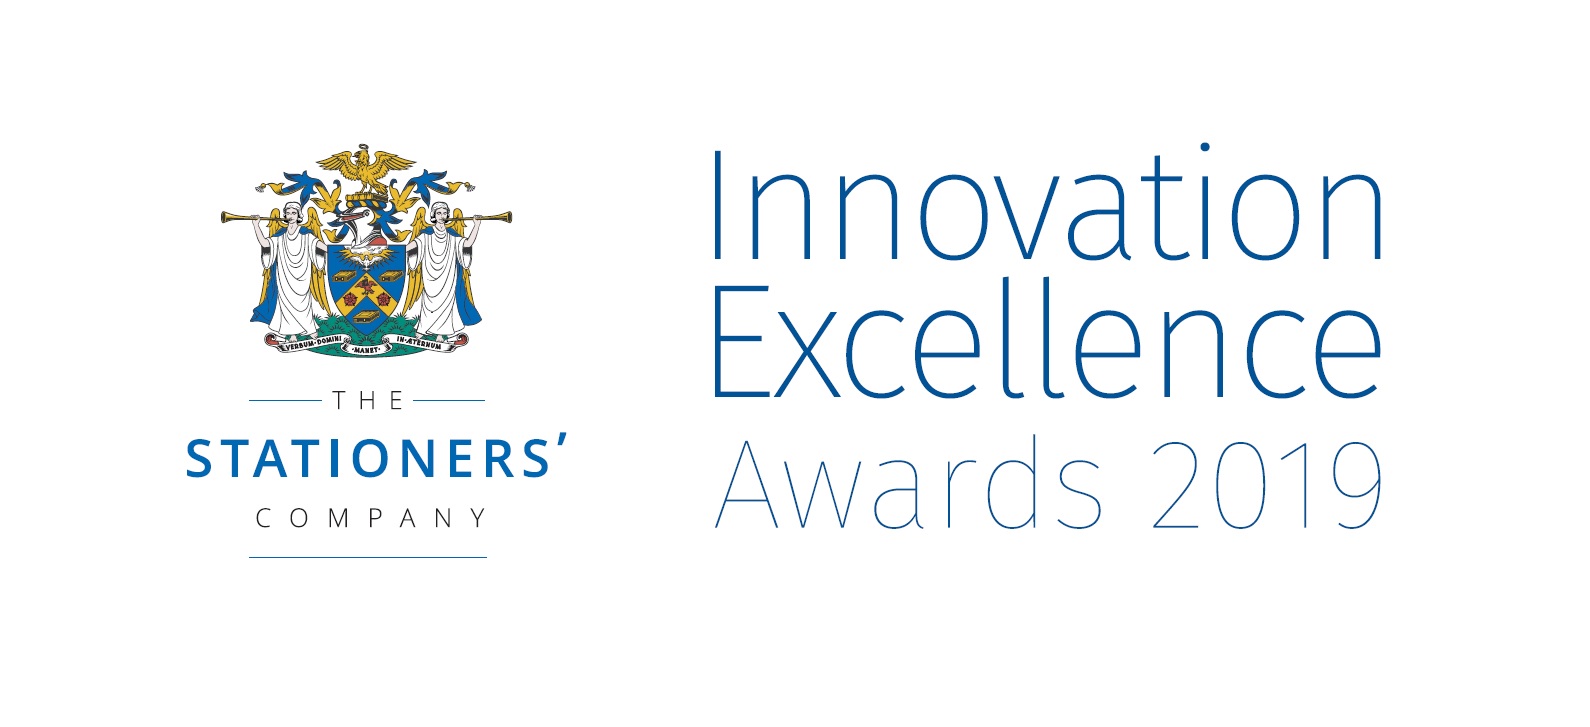 Celebrating innovation, creativity, and excellence with the Stationers’ Company